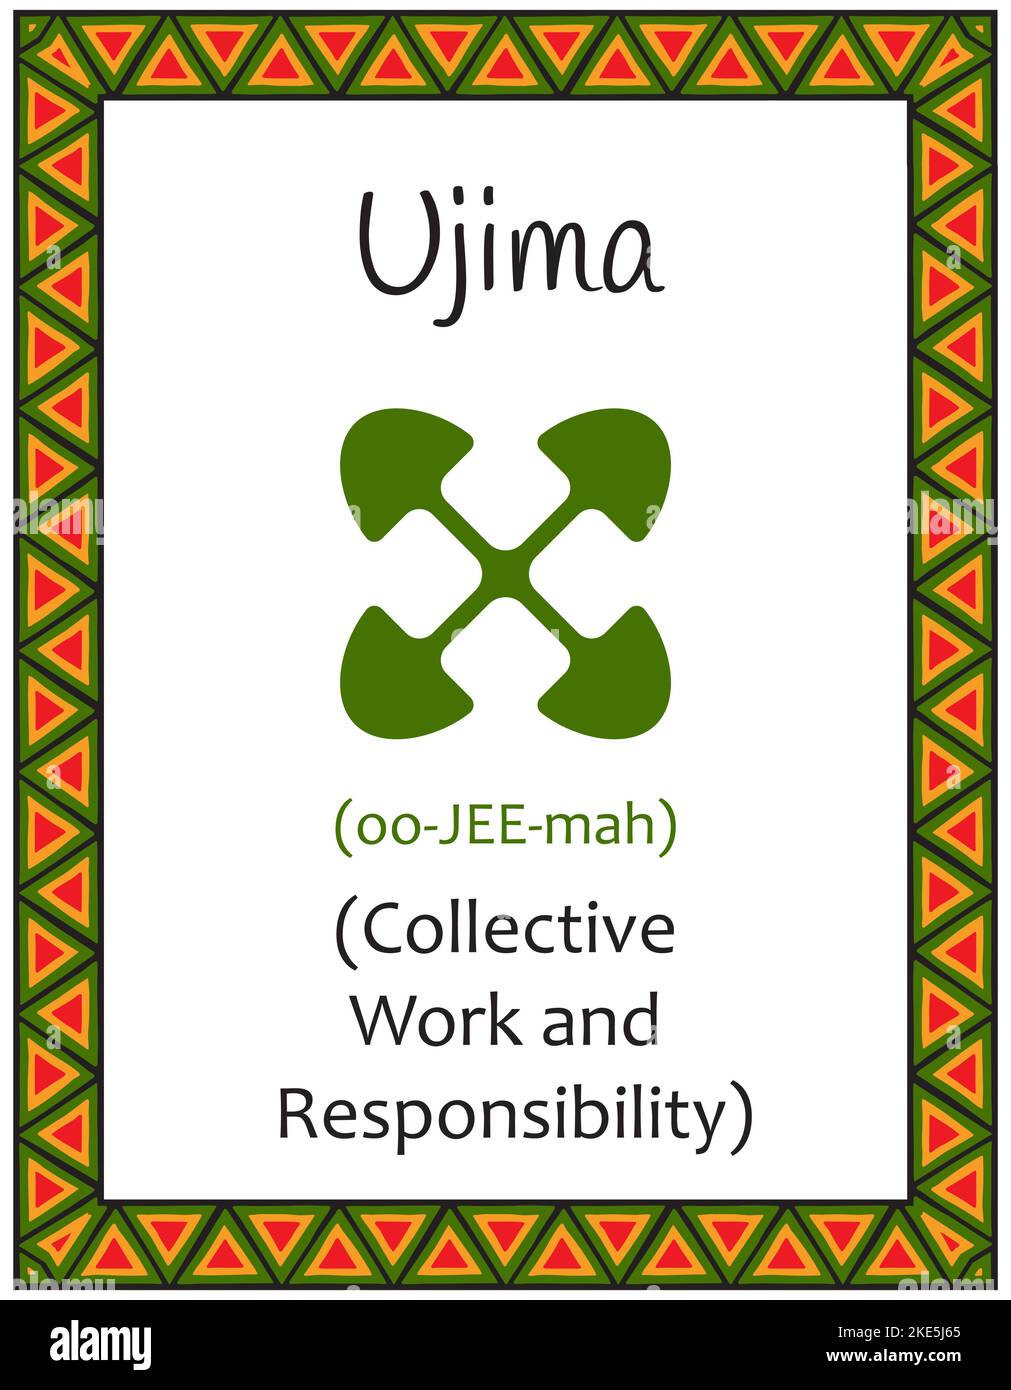 A card with one of the Kwanzaa principles. Symbol Ujiima means Collective work and responsibility in Swahili. Poster with an ethnic African pattern in Stock Vector